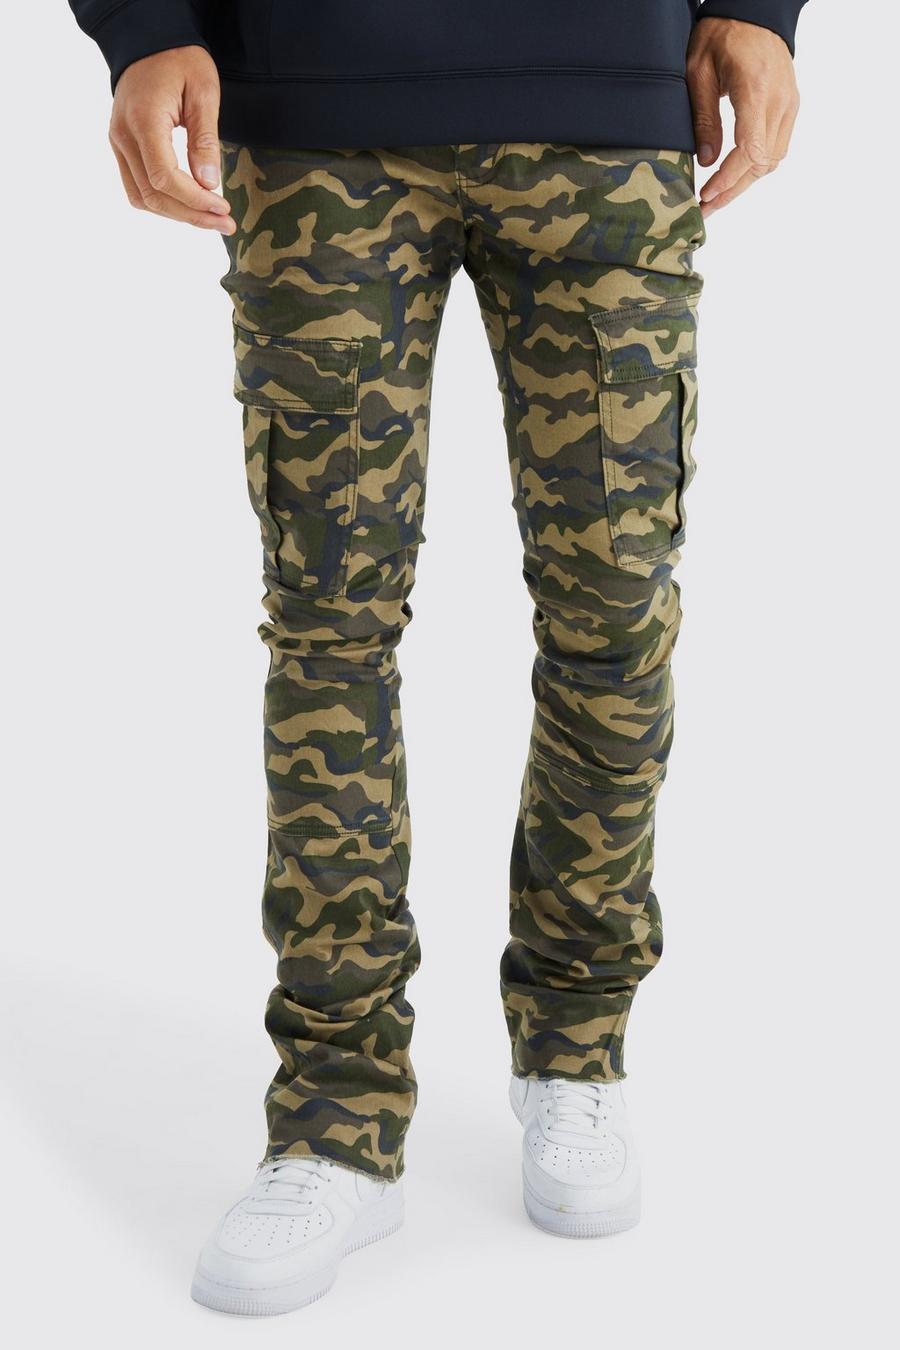 Sand Tall Stacked Flared Camo Cargo Skinny Fit Broek Met Gusset Detail